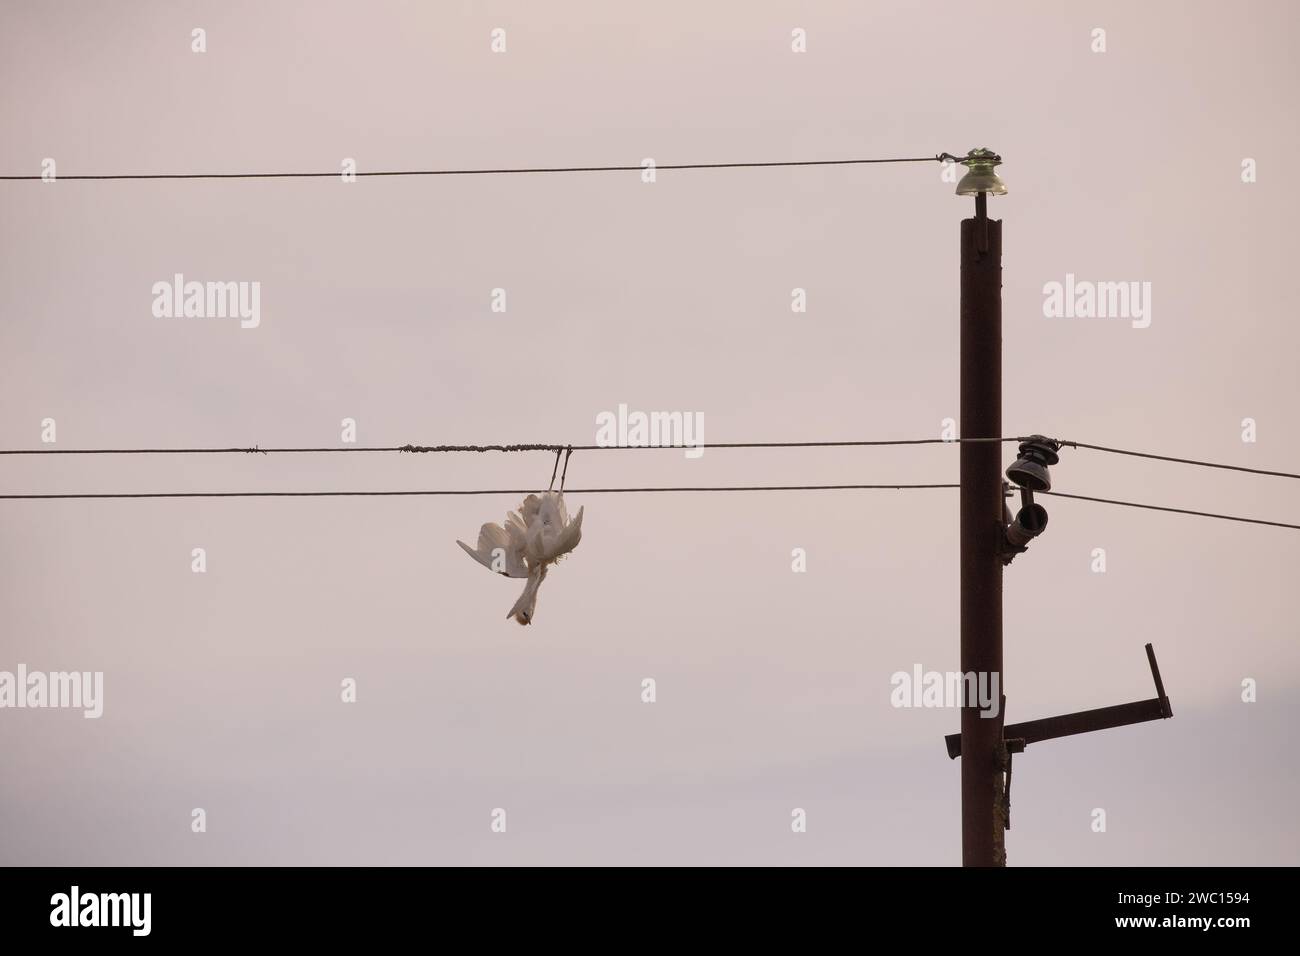 The bird is hanging on the wires, electrocuted. Stock Photo